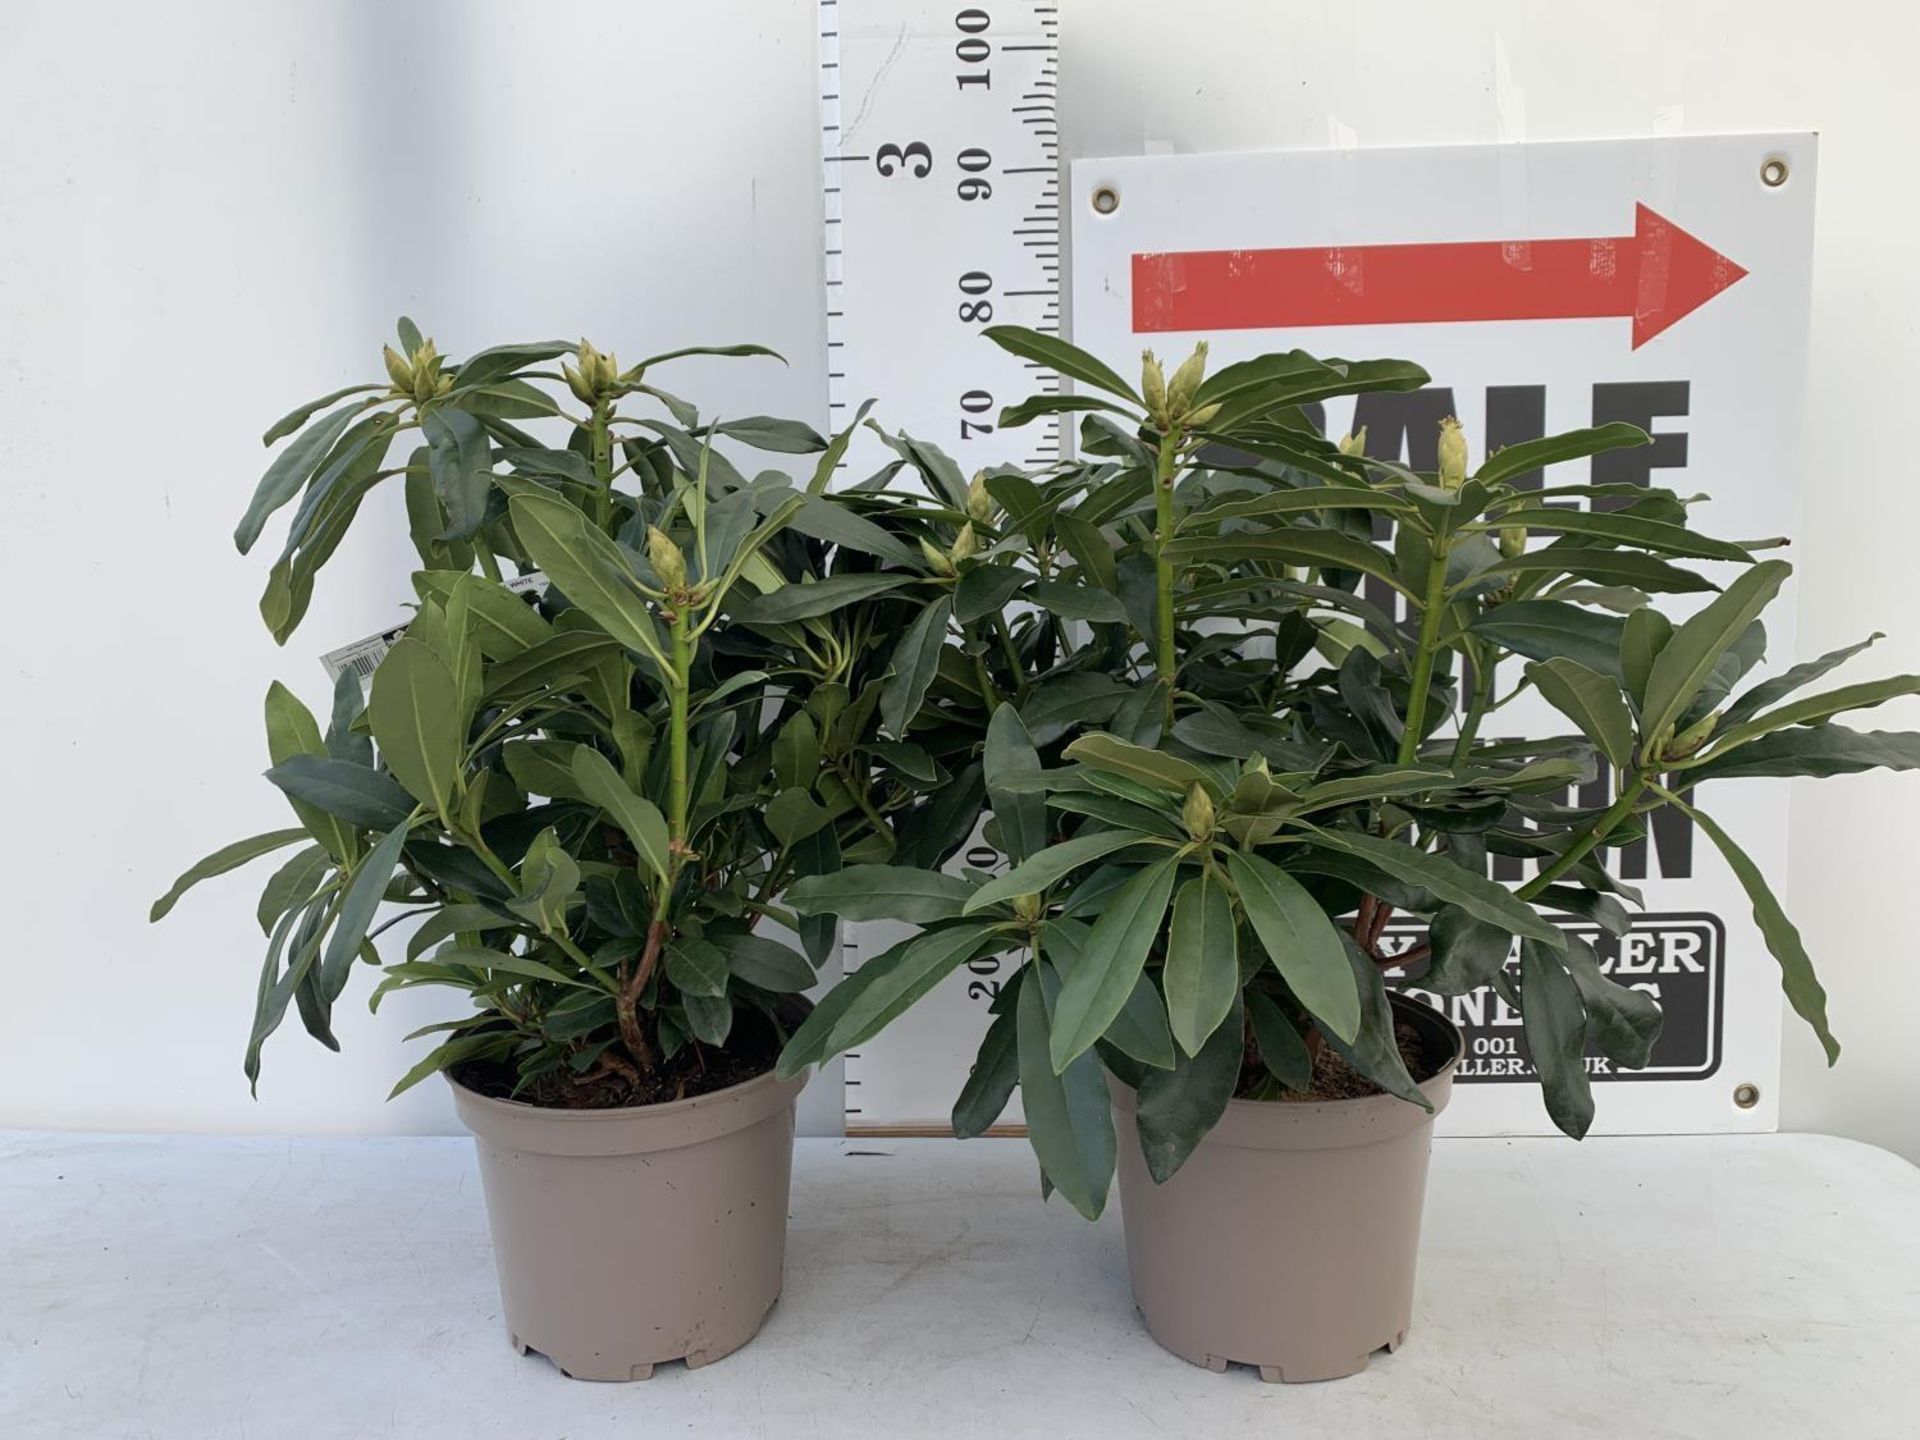 TWO RHODODENDRONS MADAME MASSON WHITE IN 7.5 LTR POTS APPROX 70CM IN HEIGHT PLUS VAT TO BE SOLD - Image 2 of 6